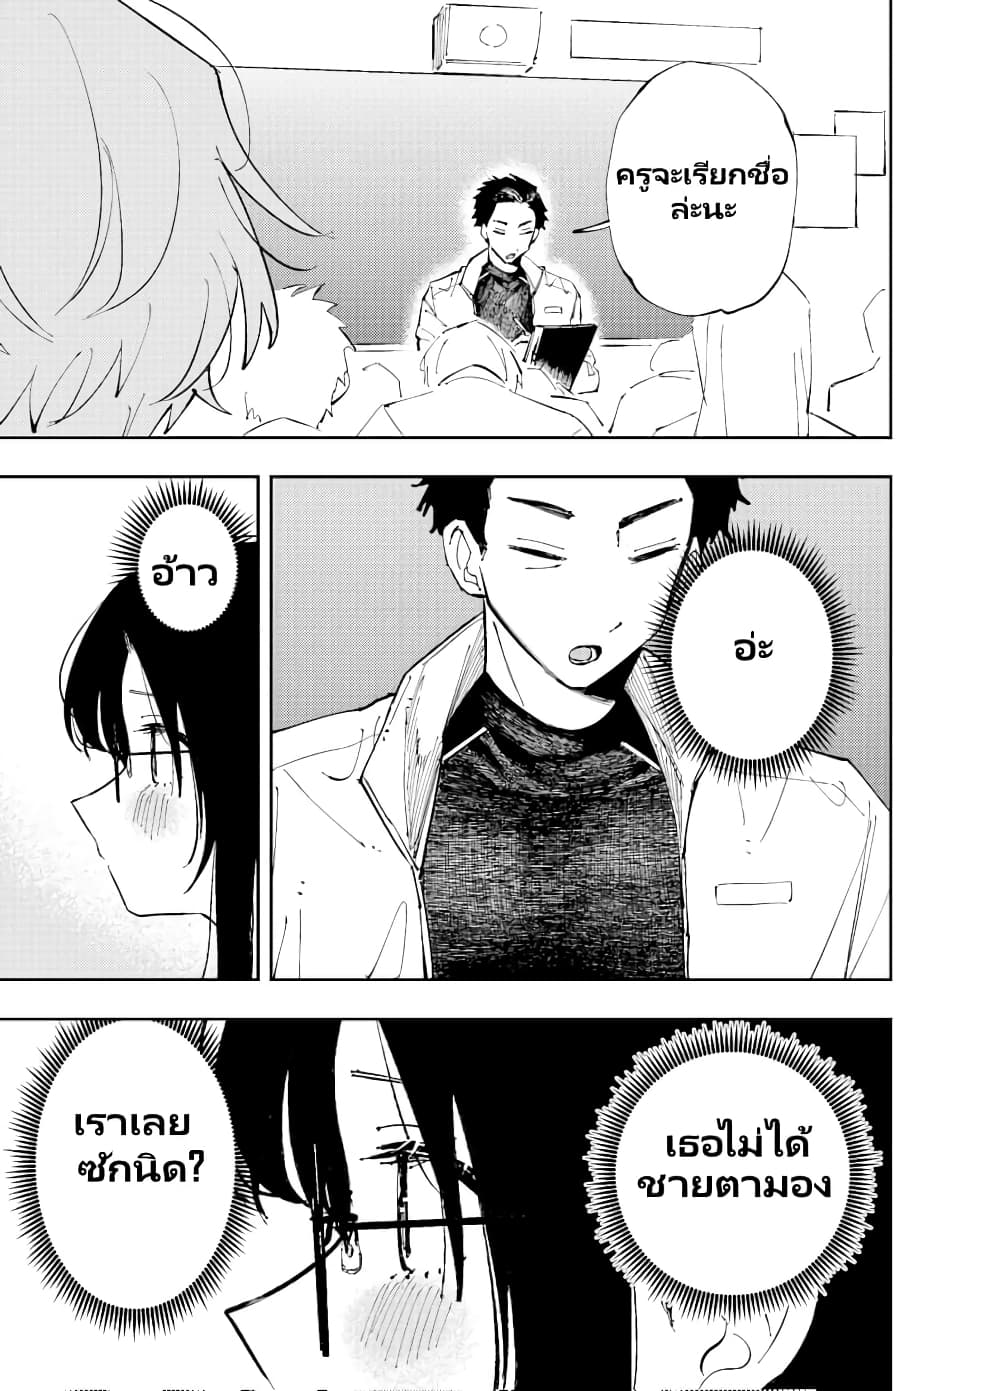 The Person Sitting Next to Me Looking at Me with Perverted Eyes ตอนที่ 3 (3)